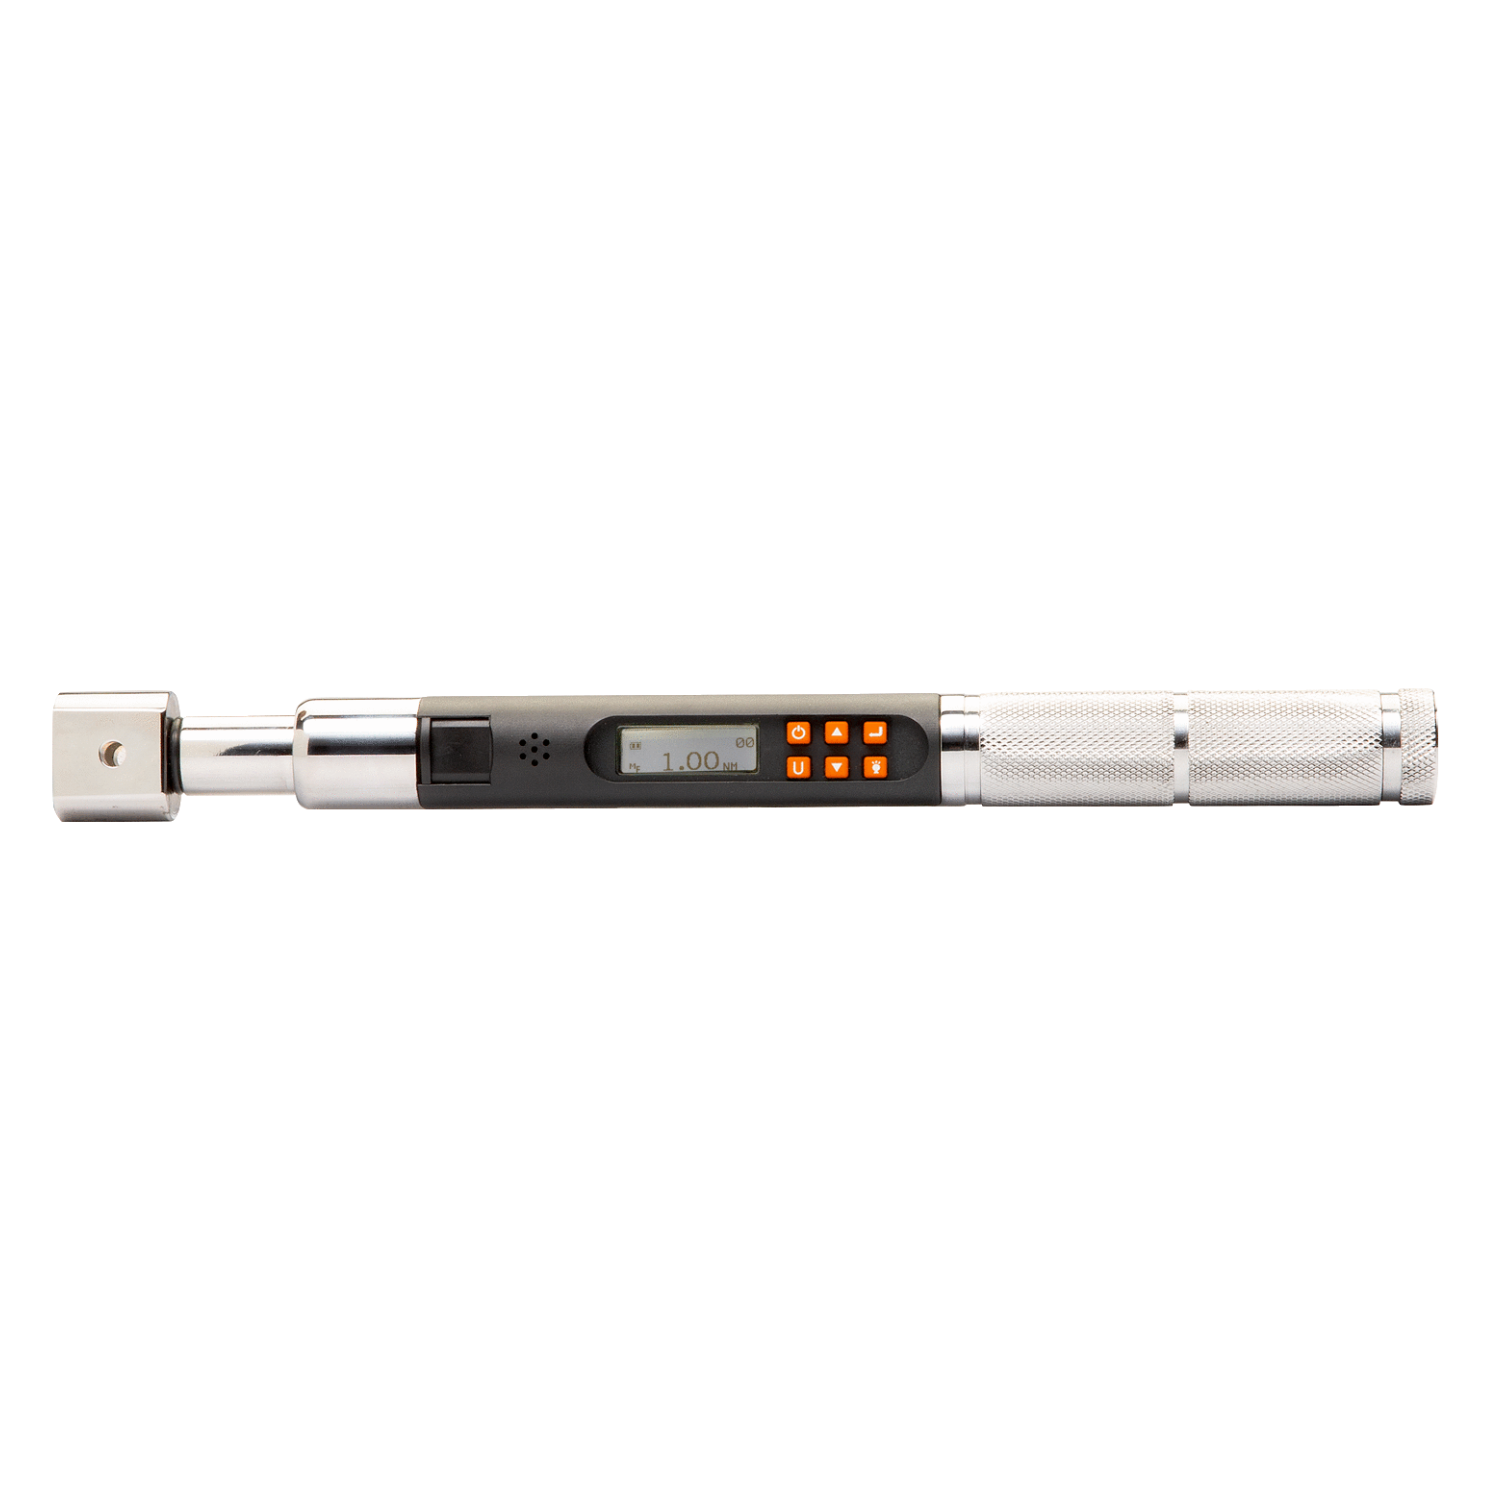 BAHCO TAWM9 MICRO Electronic Torque Wrench (BAHCO Tools) - Premium Torque Wrench from BAHCO - Shop now at Yew Aik.